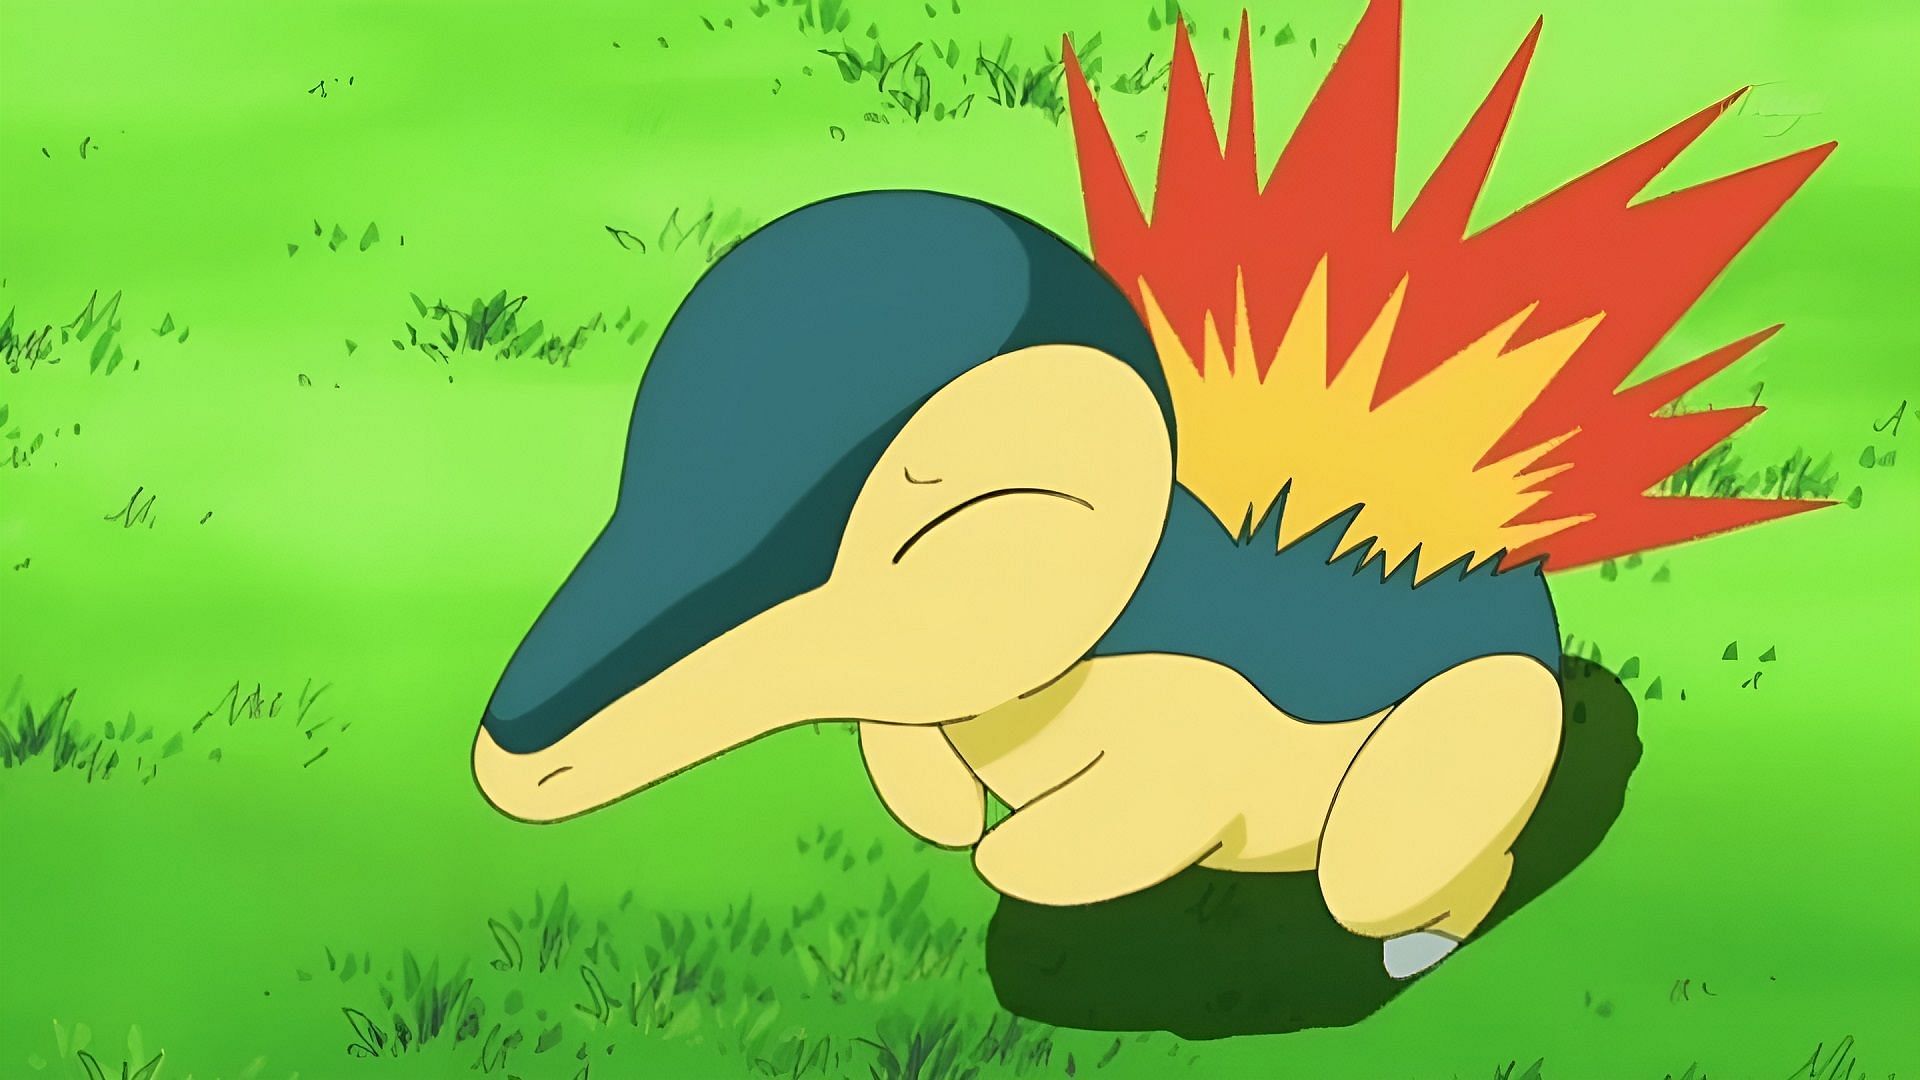 Cyndaquil as it appears in the Pokemon animated series.